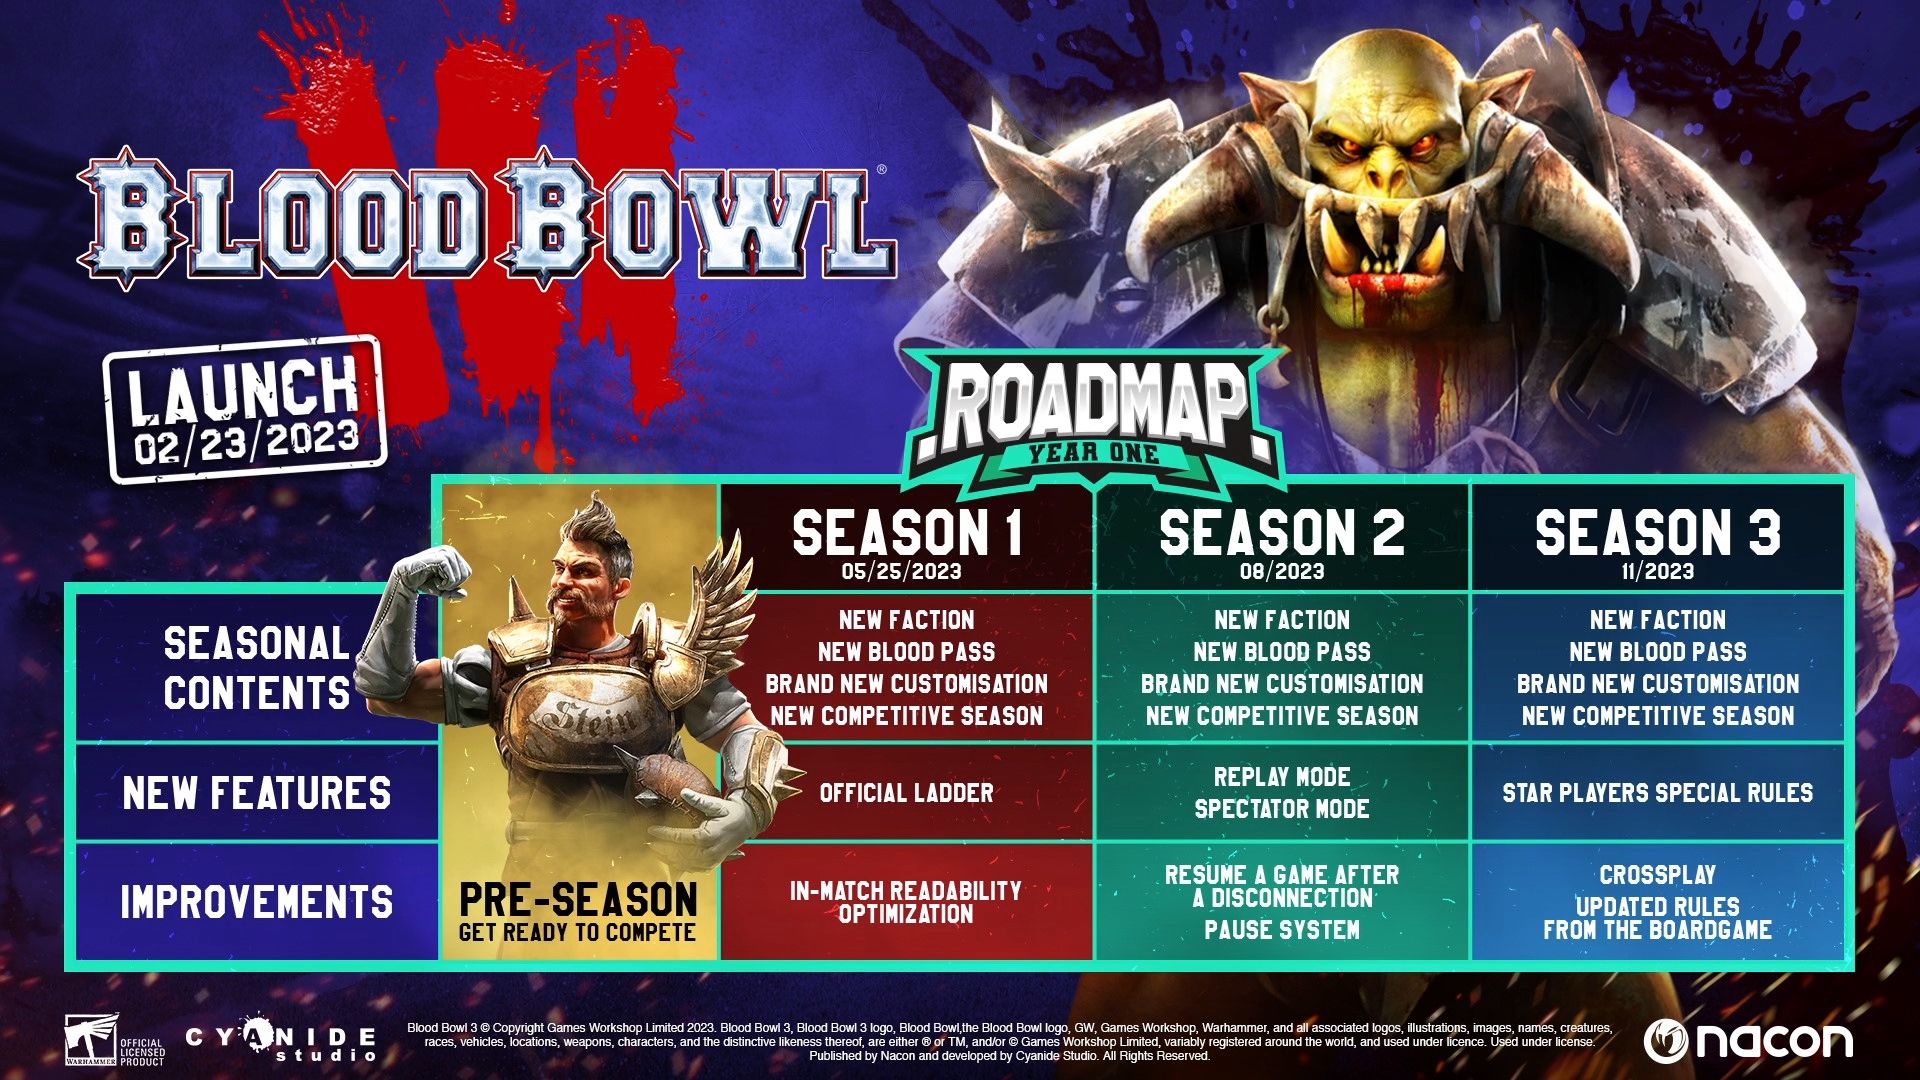 Blood Bowl 3's roadmap for 2023 showing three seasons